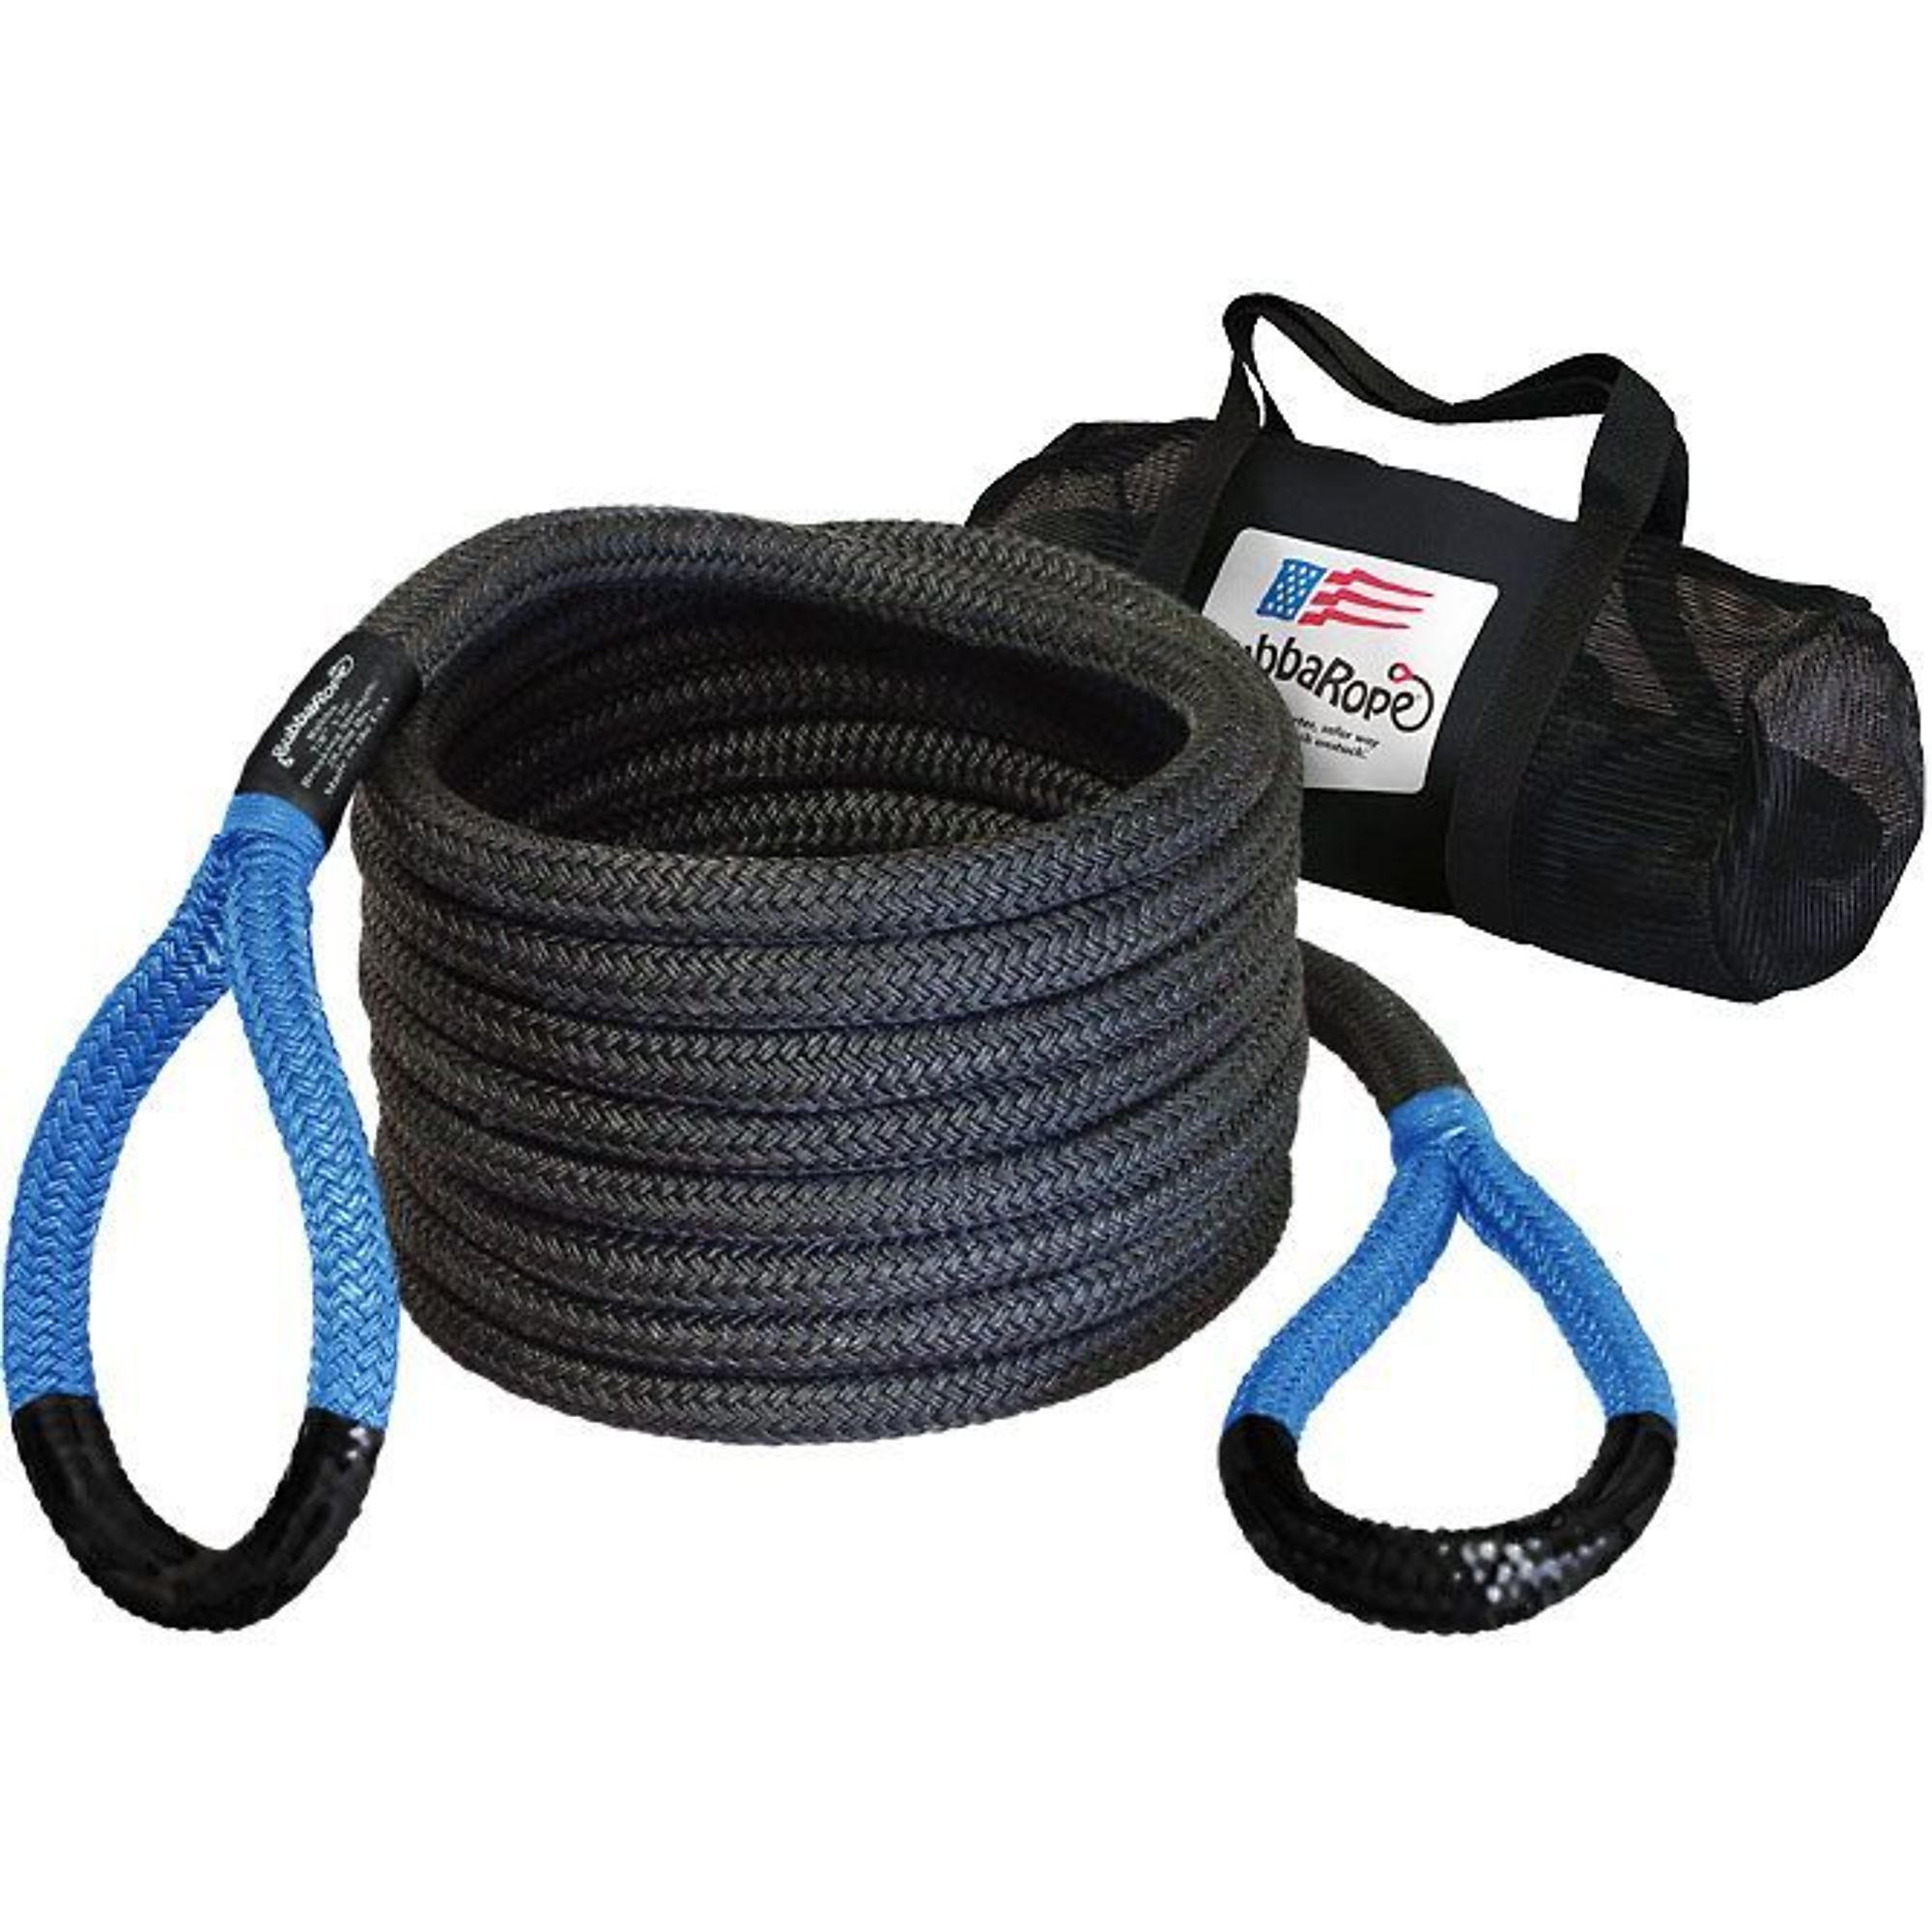 Bubba Rope, The Best Power Stretch Rope for Trucks, Length 240 in, Material HMPE, Model 176660BLG